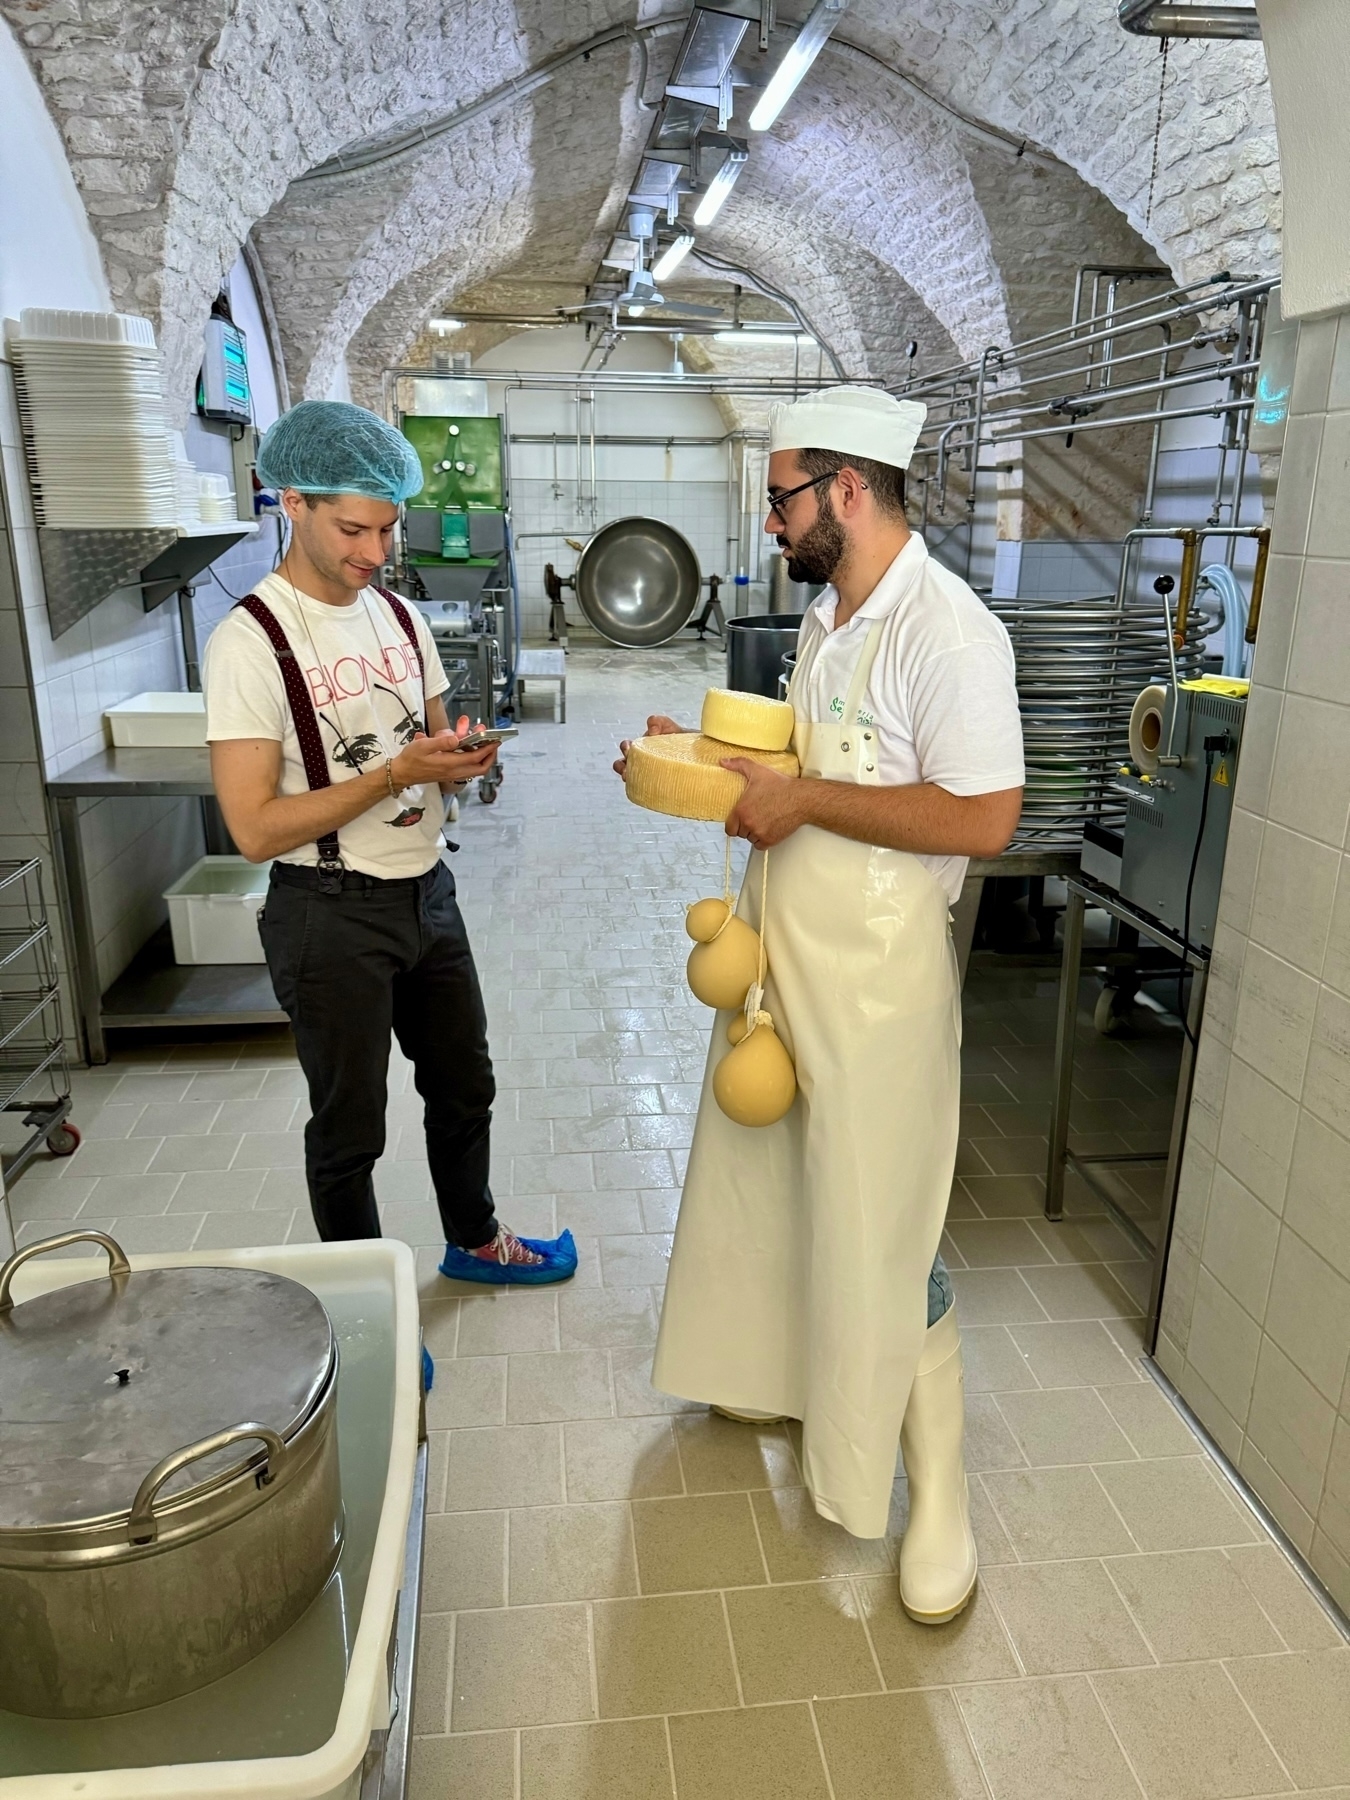 Two people are in a cheese-making facility. One person, wearing a hairnet, suspenders, and shoe covers, looks at their phone. The other person, dressed in white protective clothing, including a hat, apron, and boots, holds cheese. 